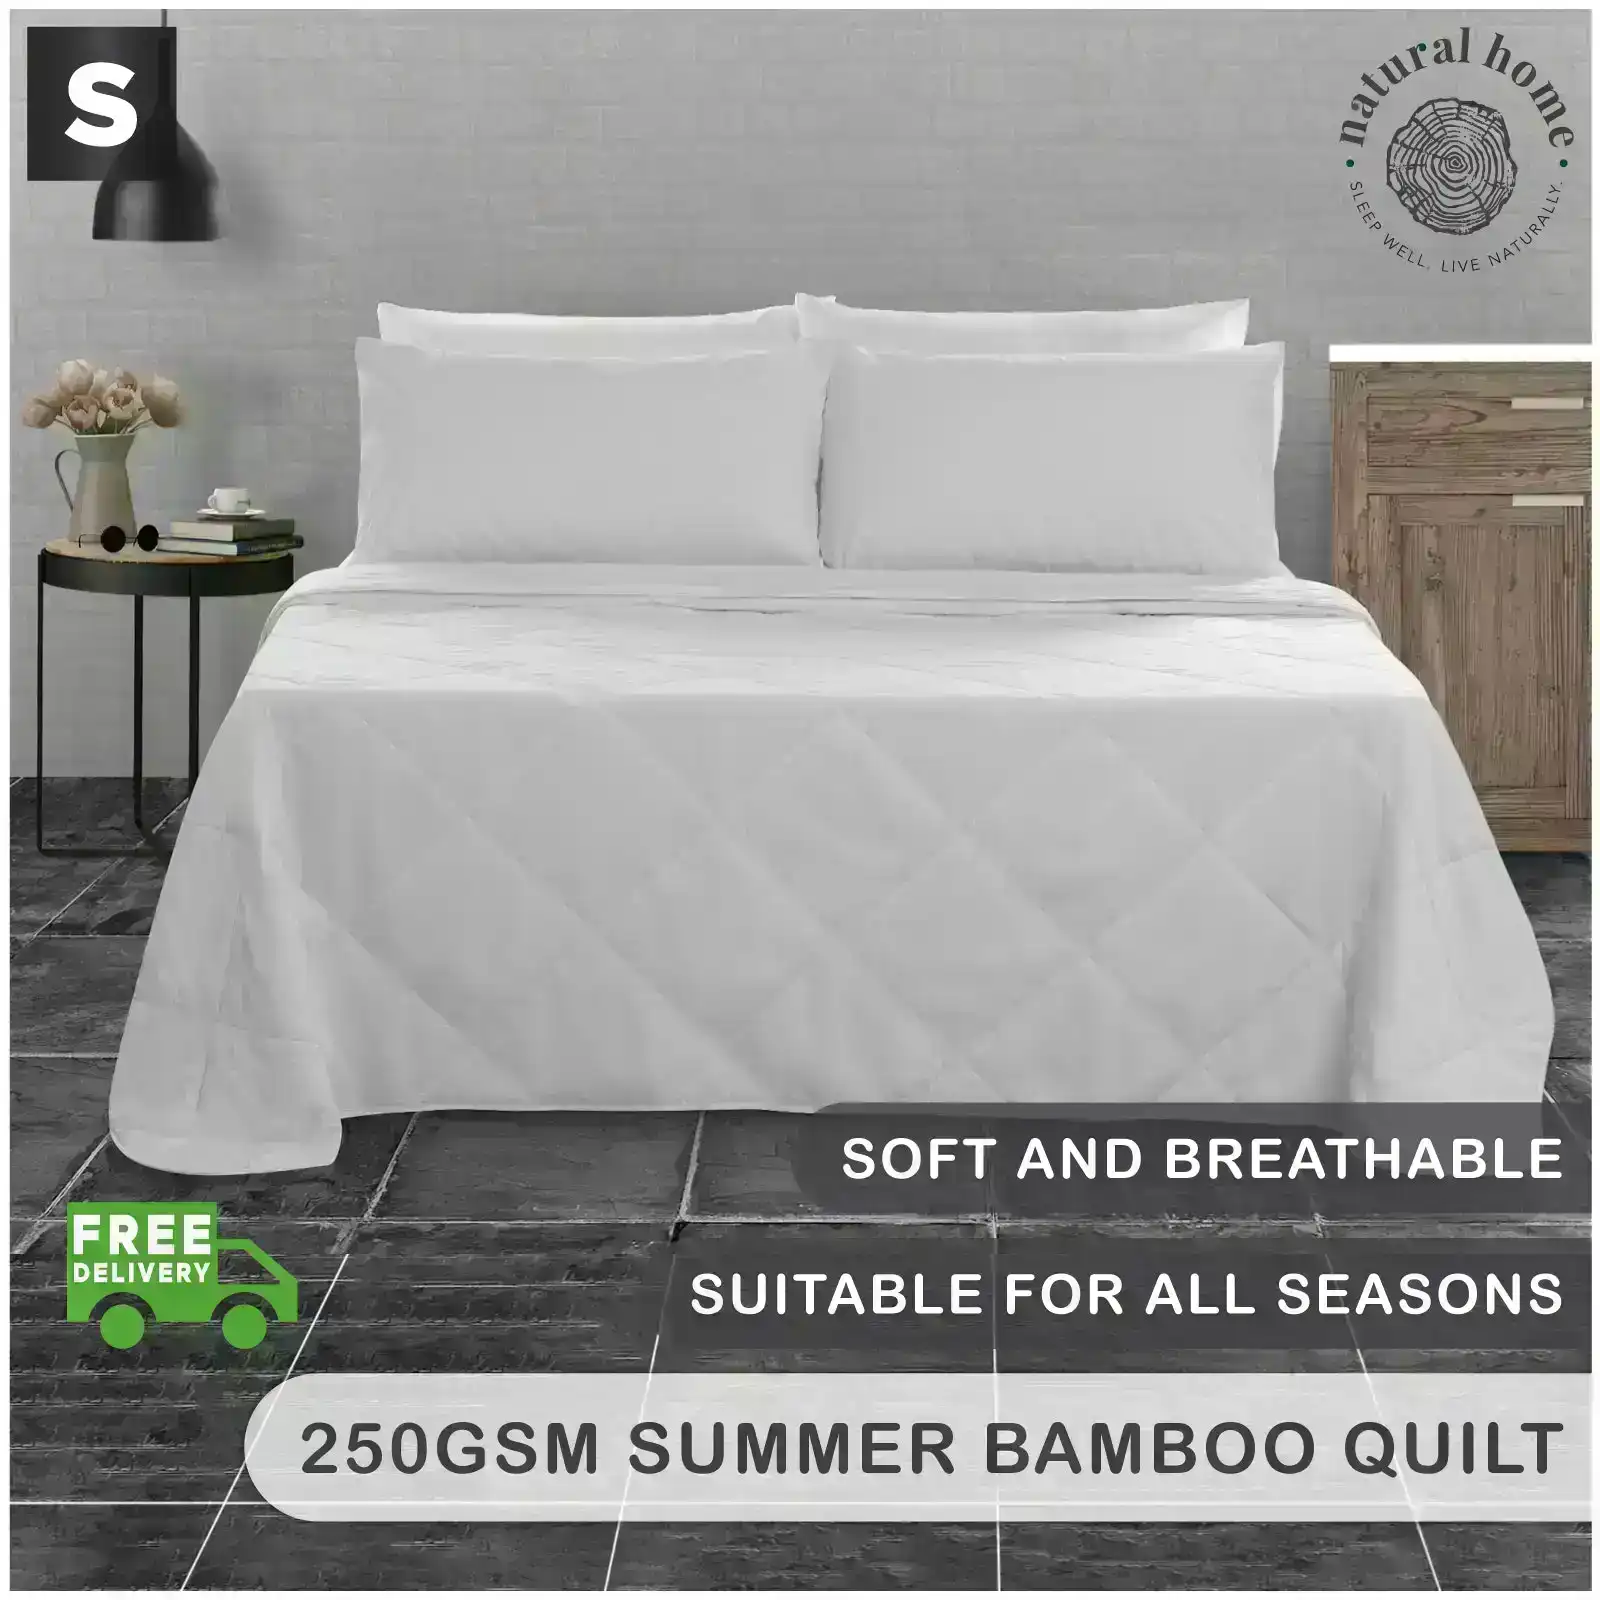 Natural Home Summer Bamboo Quilt 250gsm - White - Single Bed